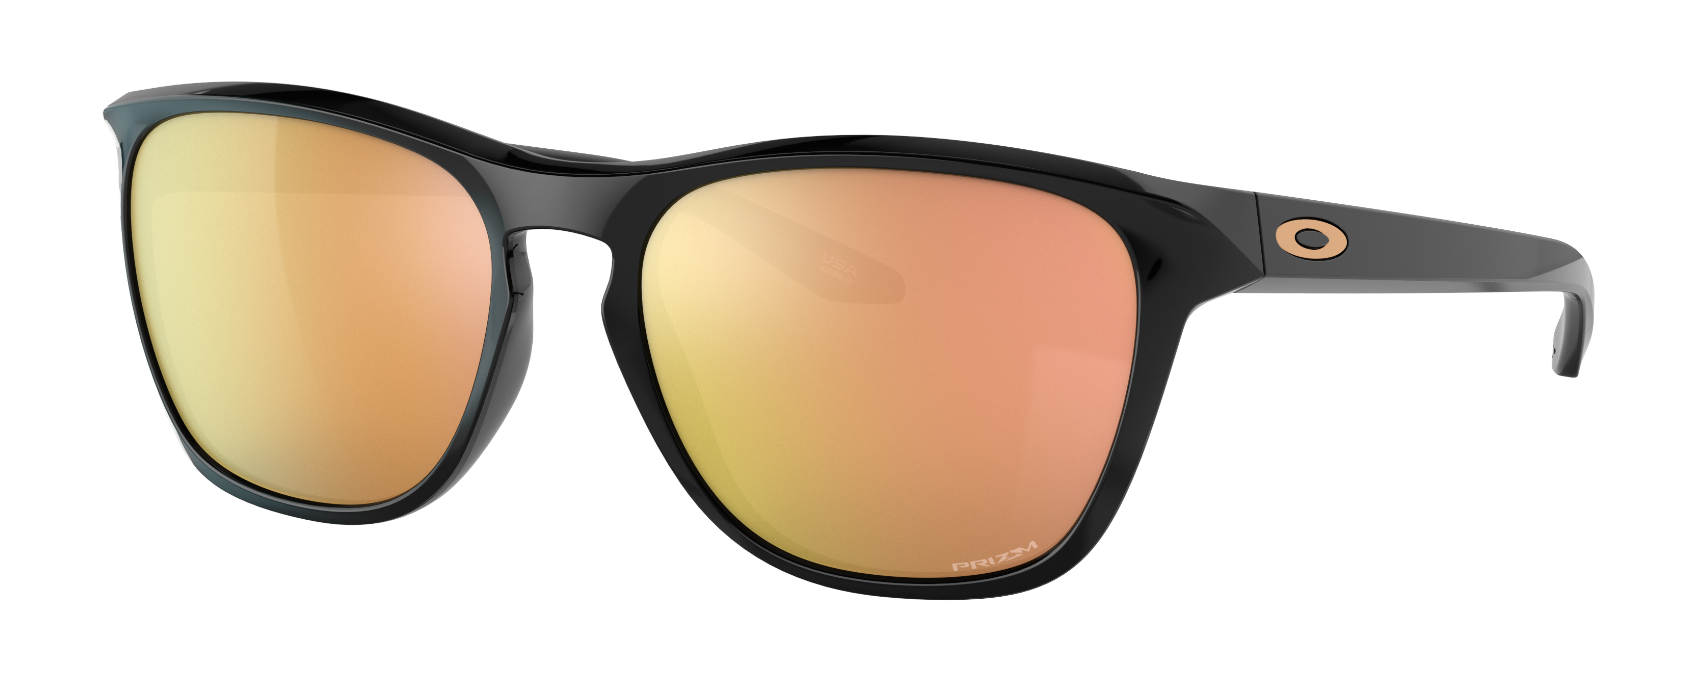 oakley manorburn sunglasses in polished black with prizm rose gold lenses in lineup of best oakley women's sunglasses